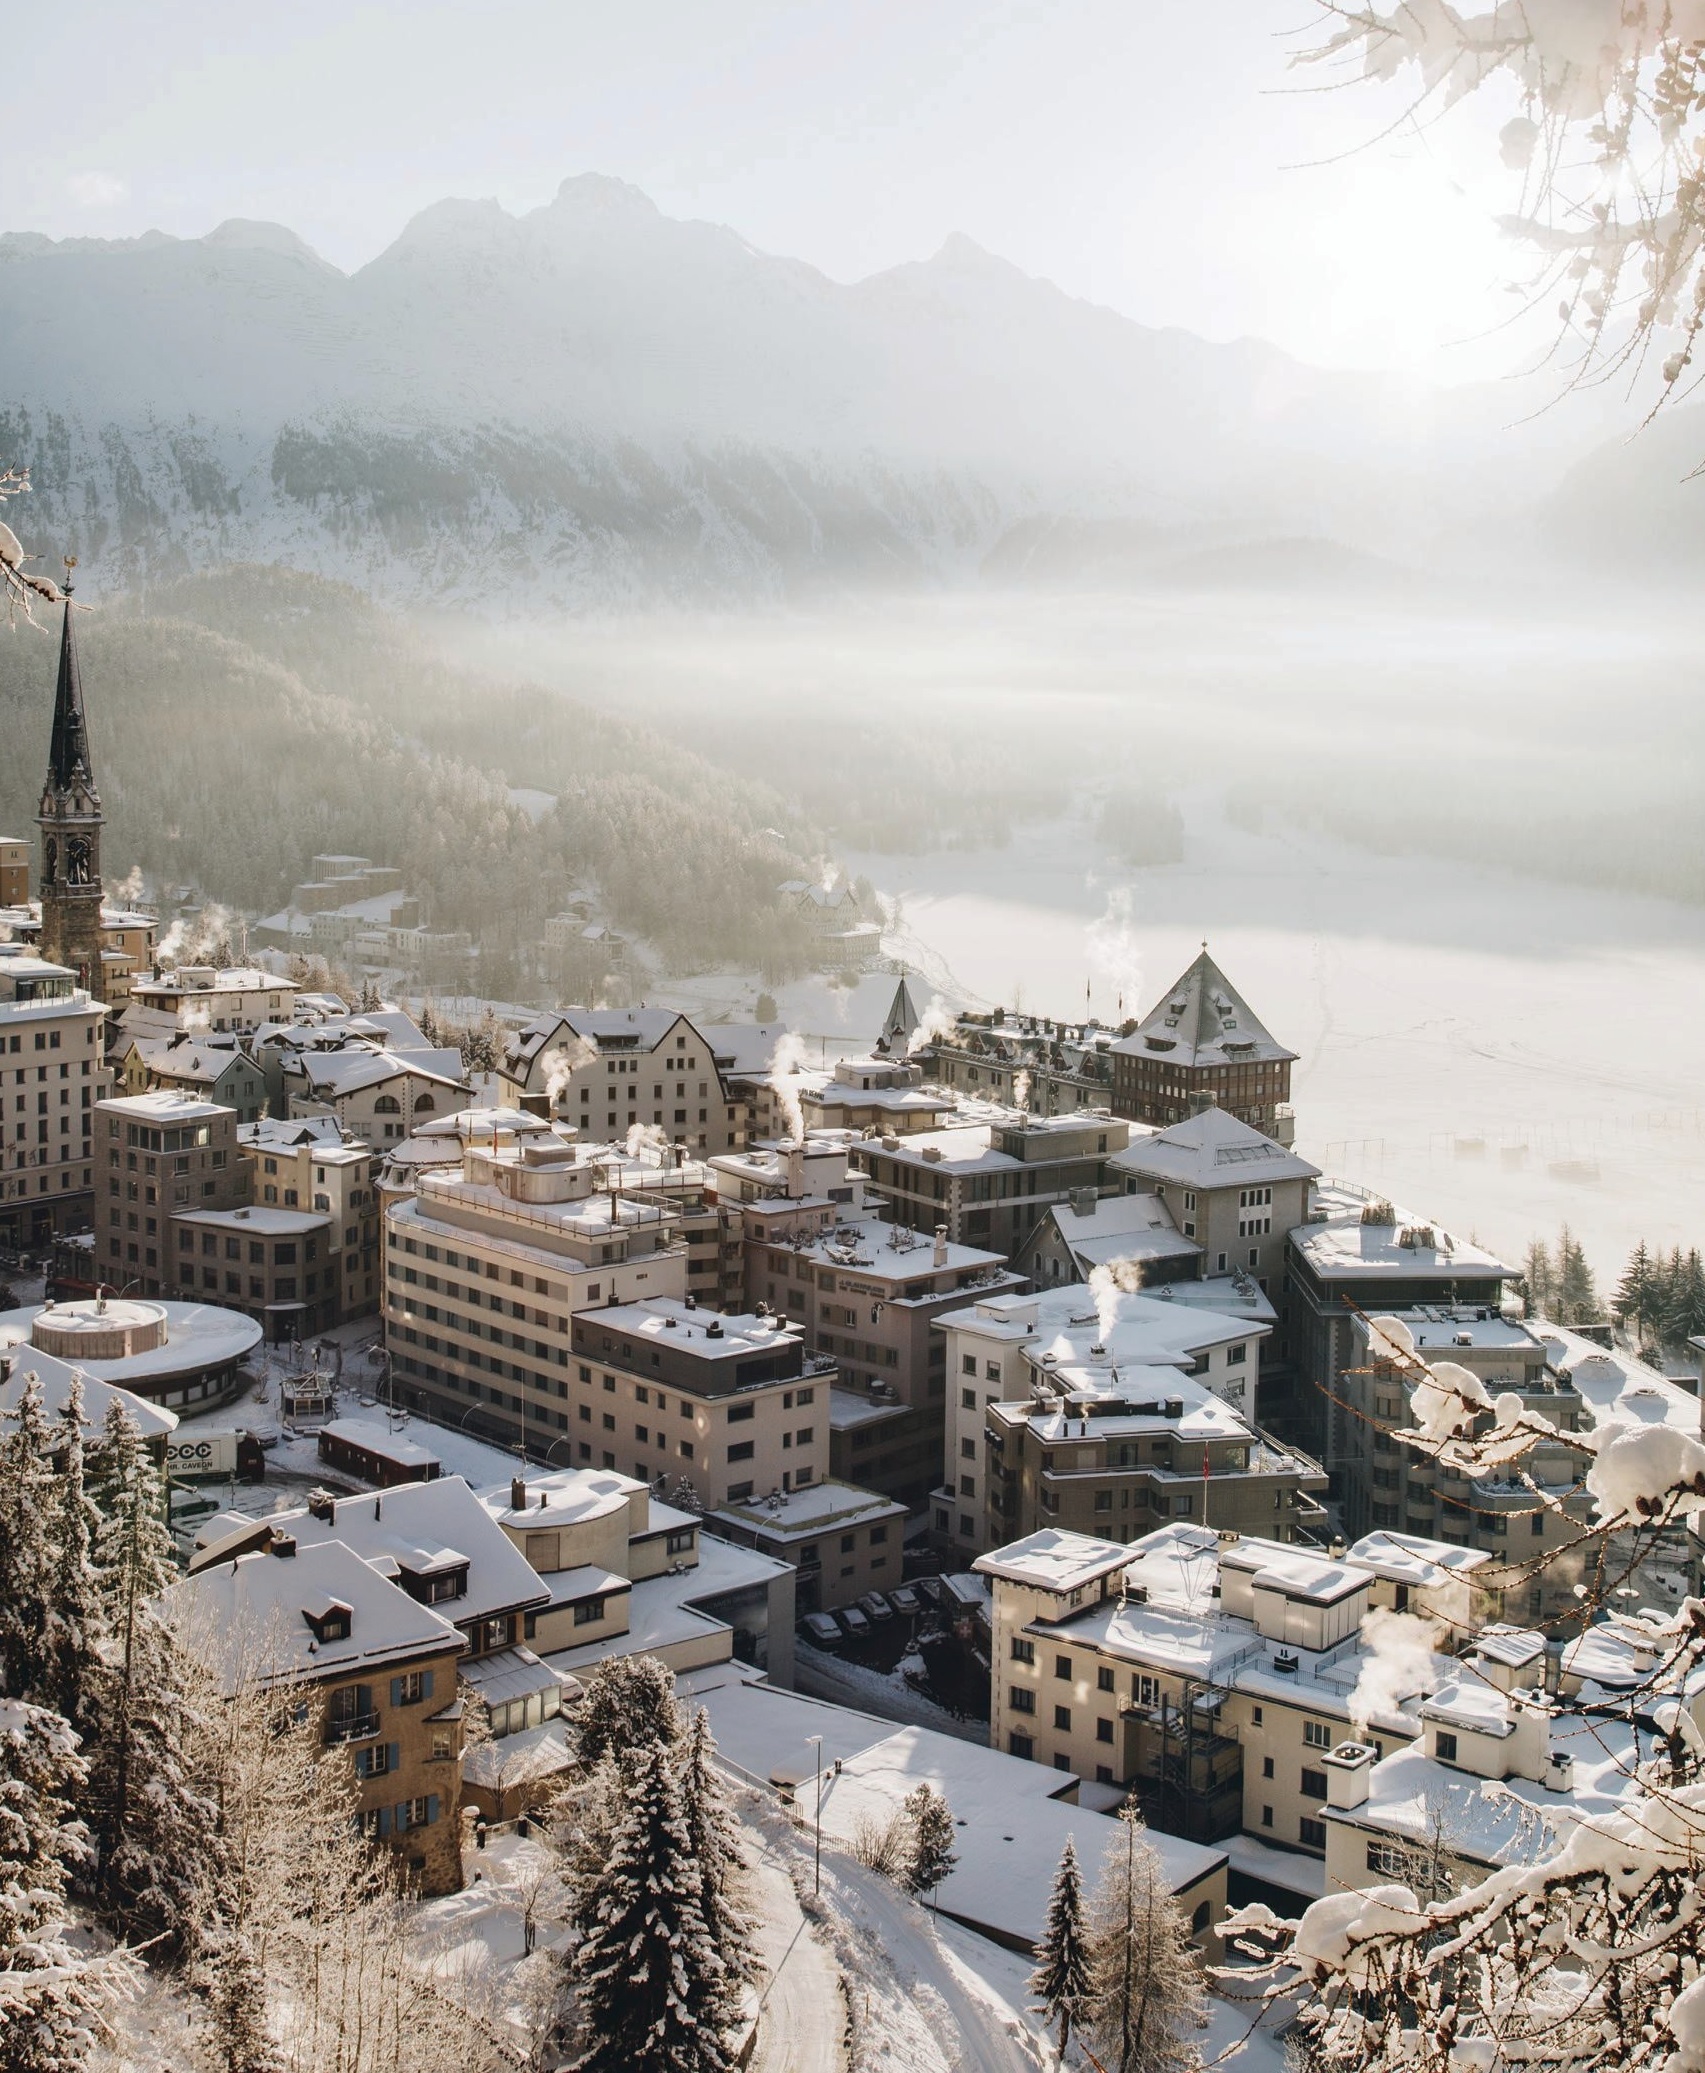 In a picturesque lakeside setting in the heart of St. Moritz, Badrutt’s Palace Hotel has charmed A-list travelers for generations. PHOTO BY FABIEN GATT LEN/COURTESY OF BADRUTT ’S PALACE HOTEL 